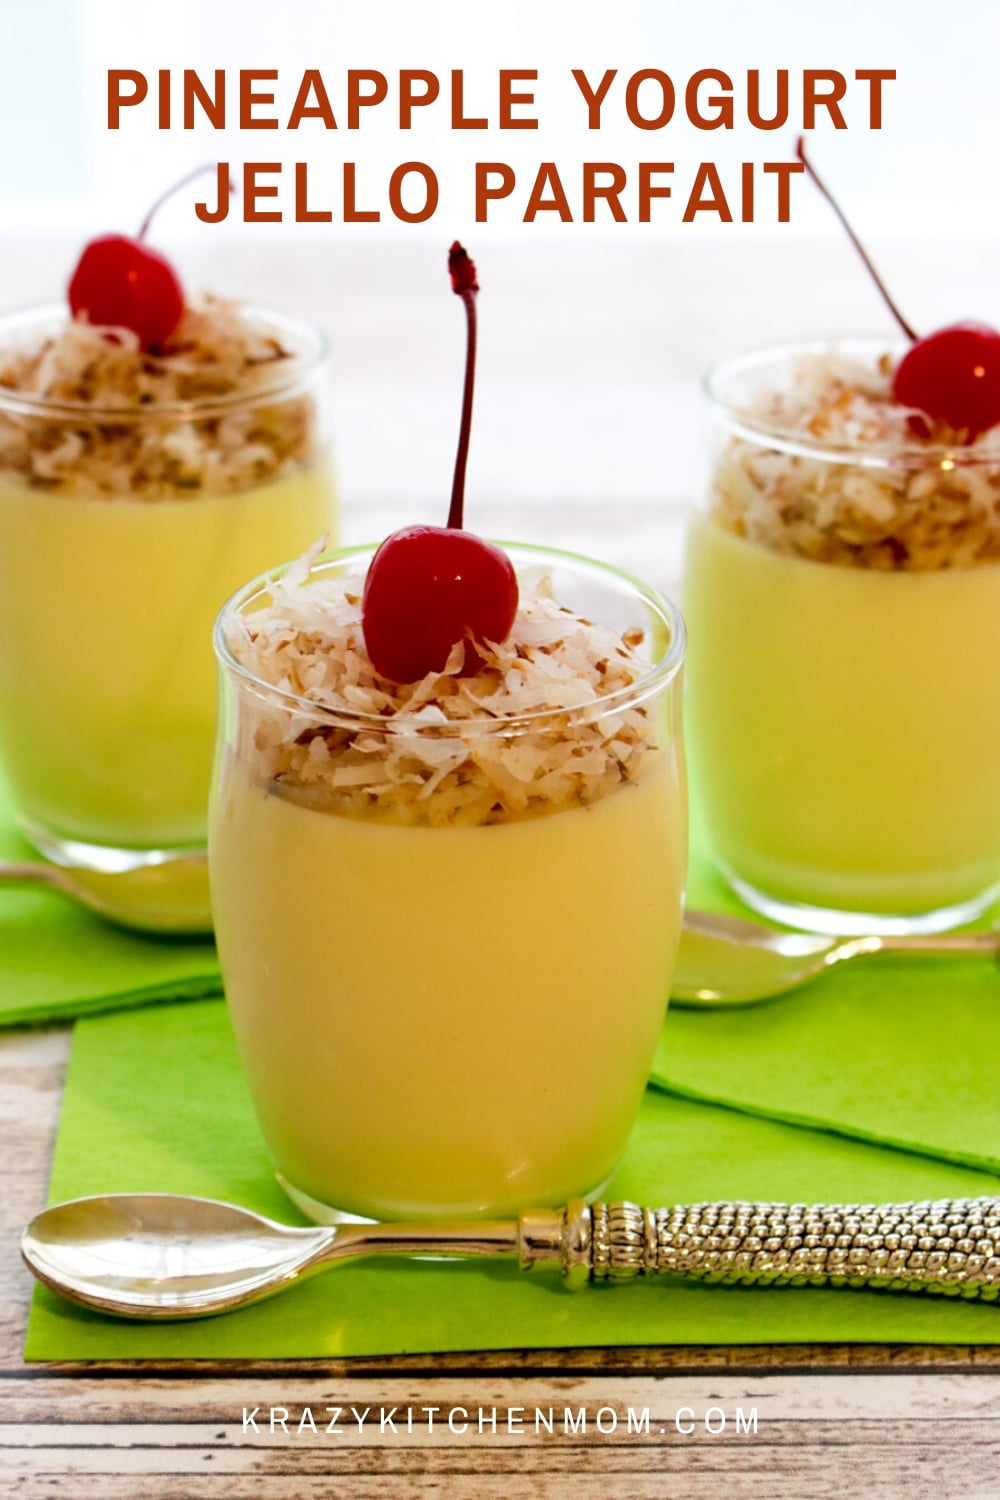 This three-ingredient, no-bake Pineapple Yogurt Jello Parfait is a light and refreshing dessert that's the perfect treat for a warm summer day.  via @krazykitchenmom